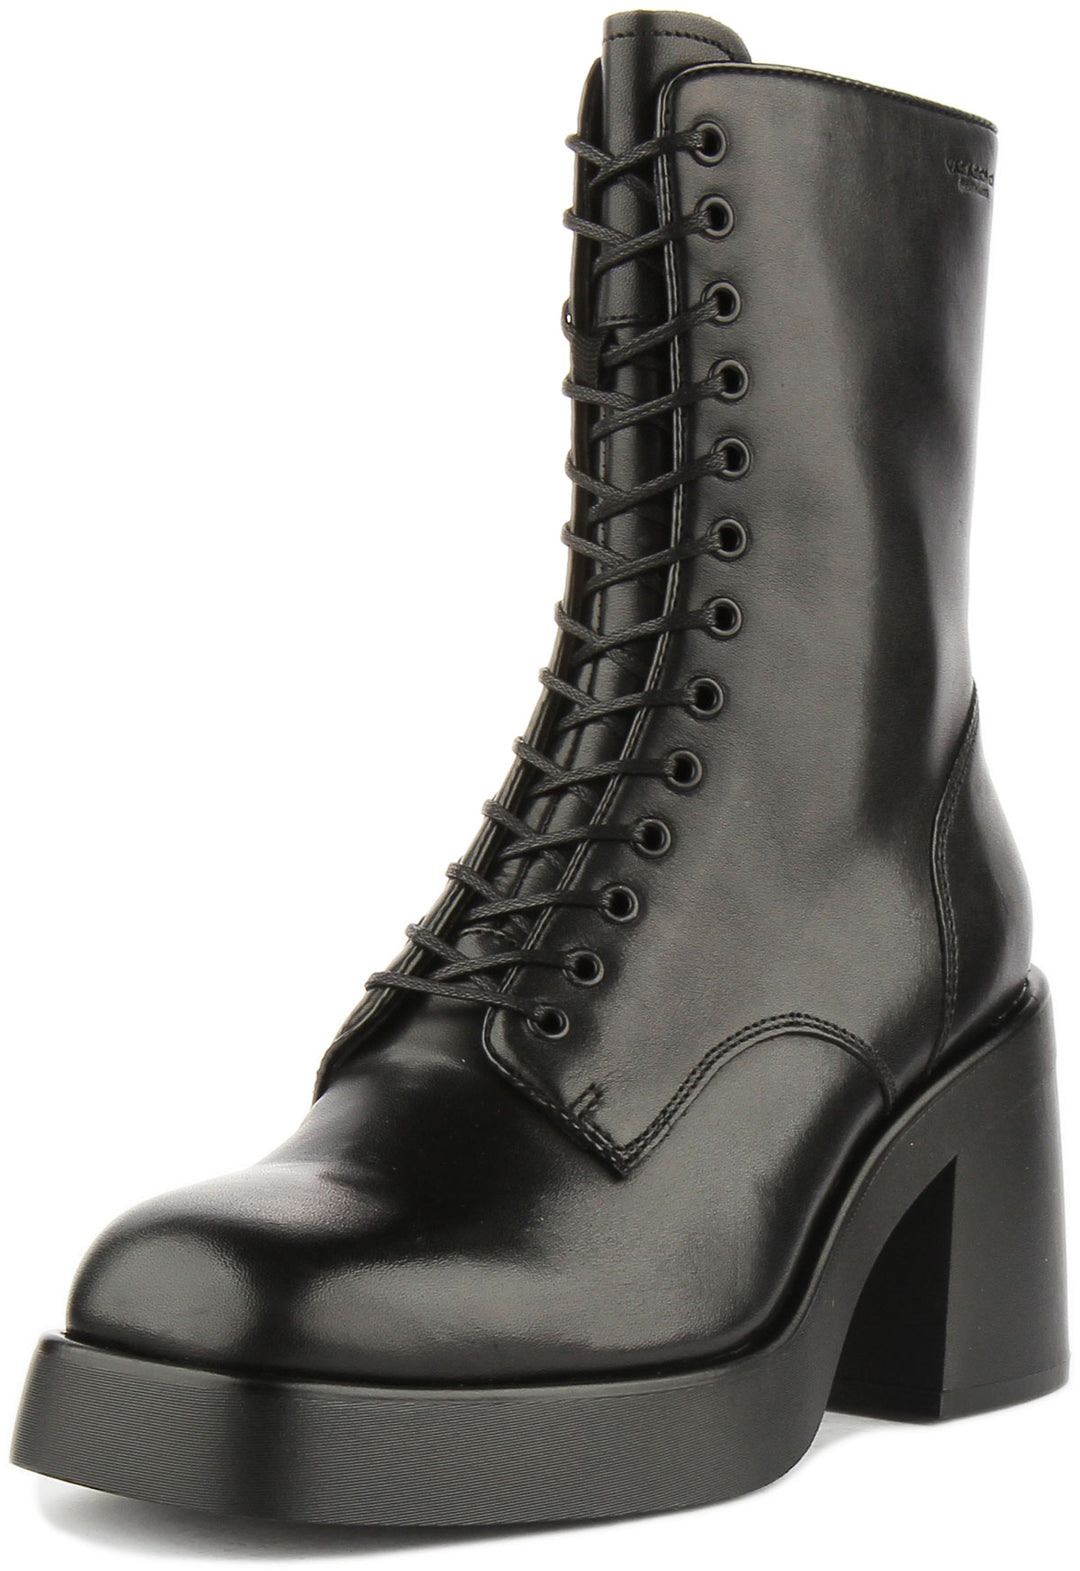 Vagabond Brooke Ankle Boots In Black For Women